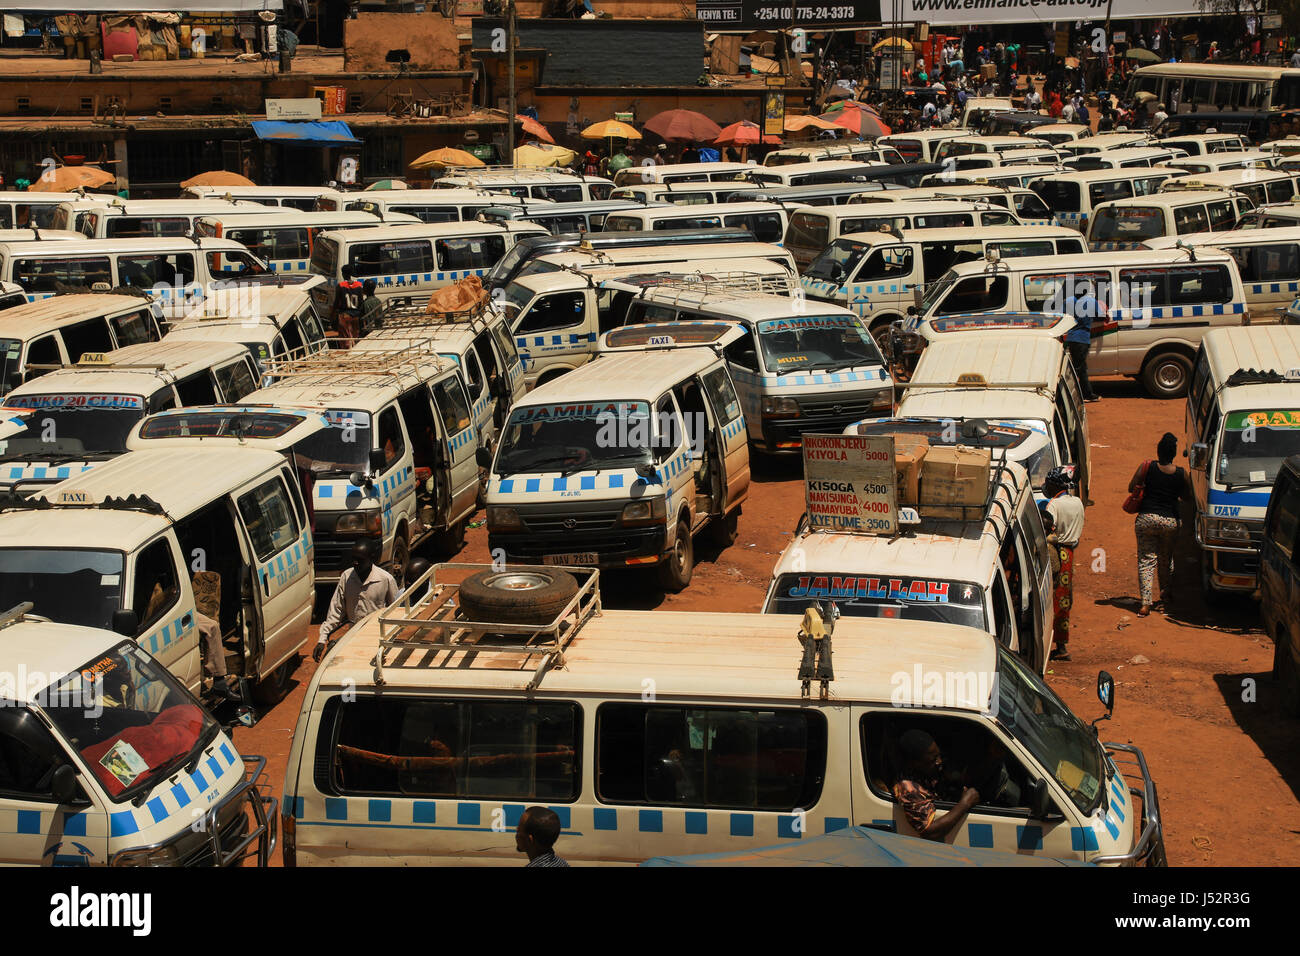 Kampala Taxi rank or park, also known as matatus. They follow relatively pre-set routes all over the city and many over the city and country. Stock Photo